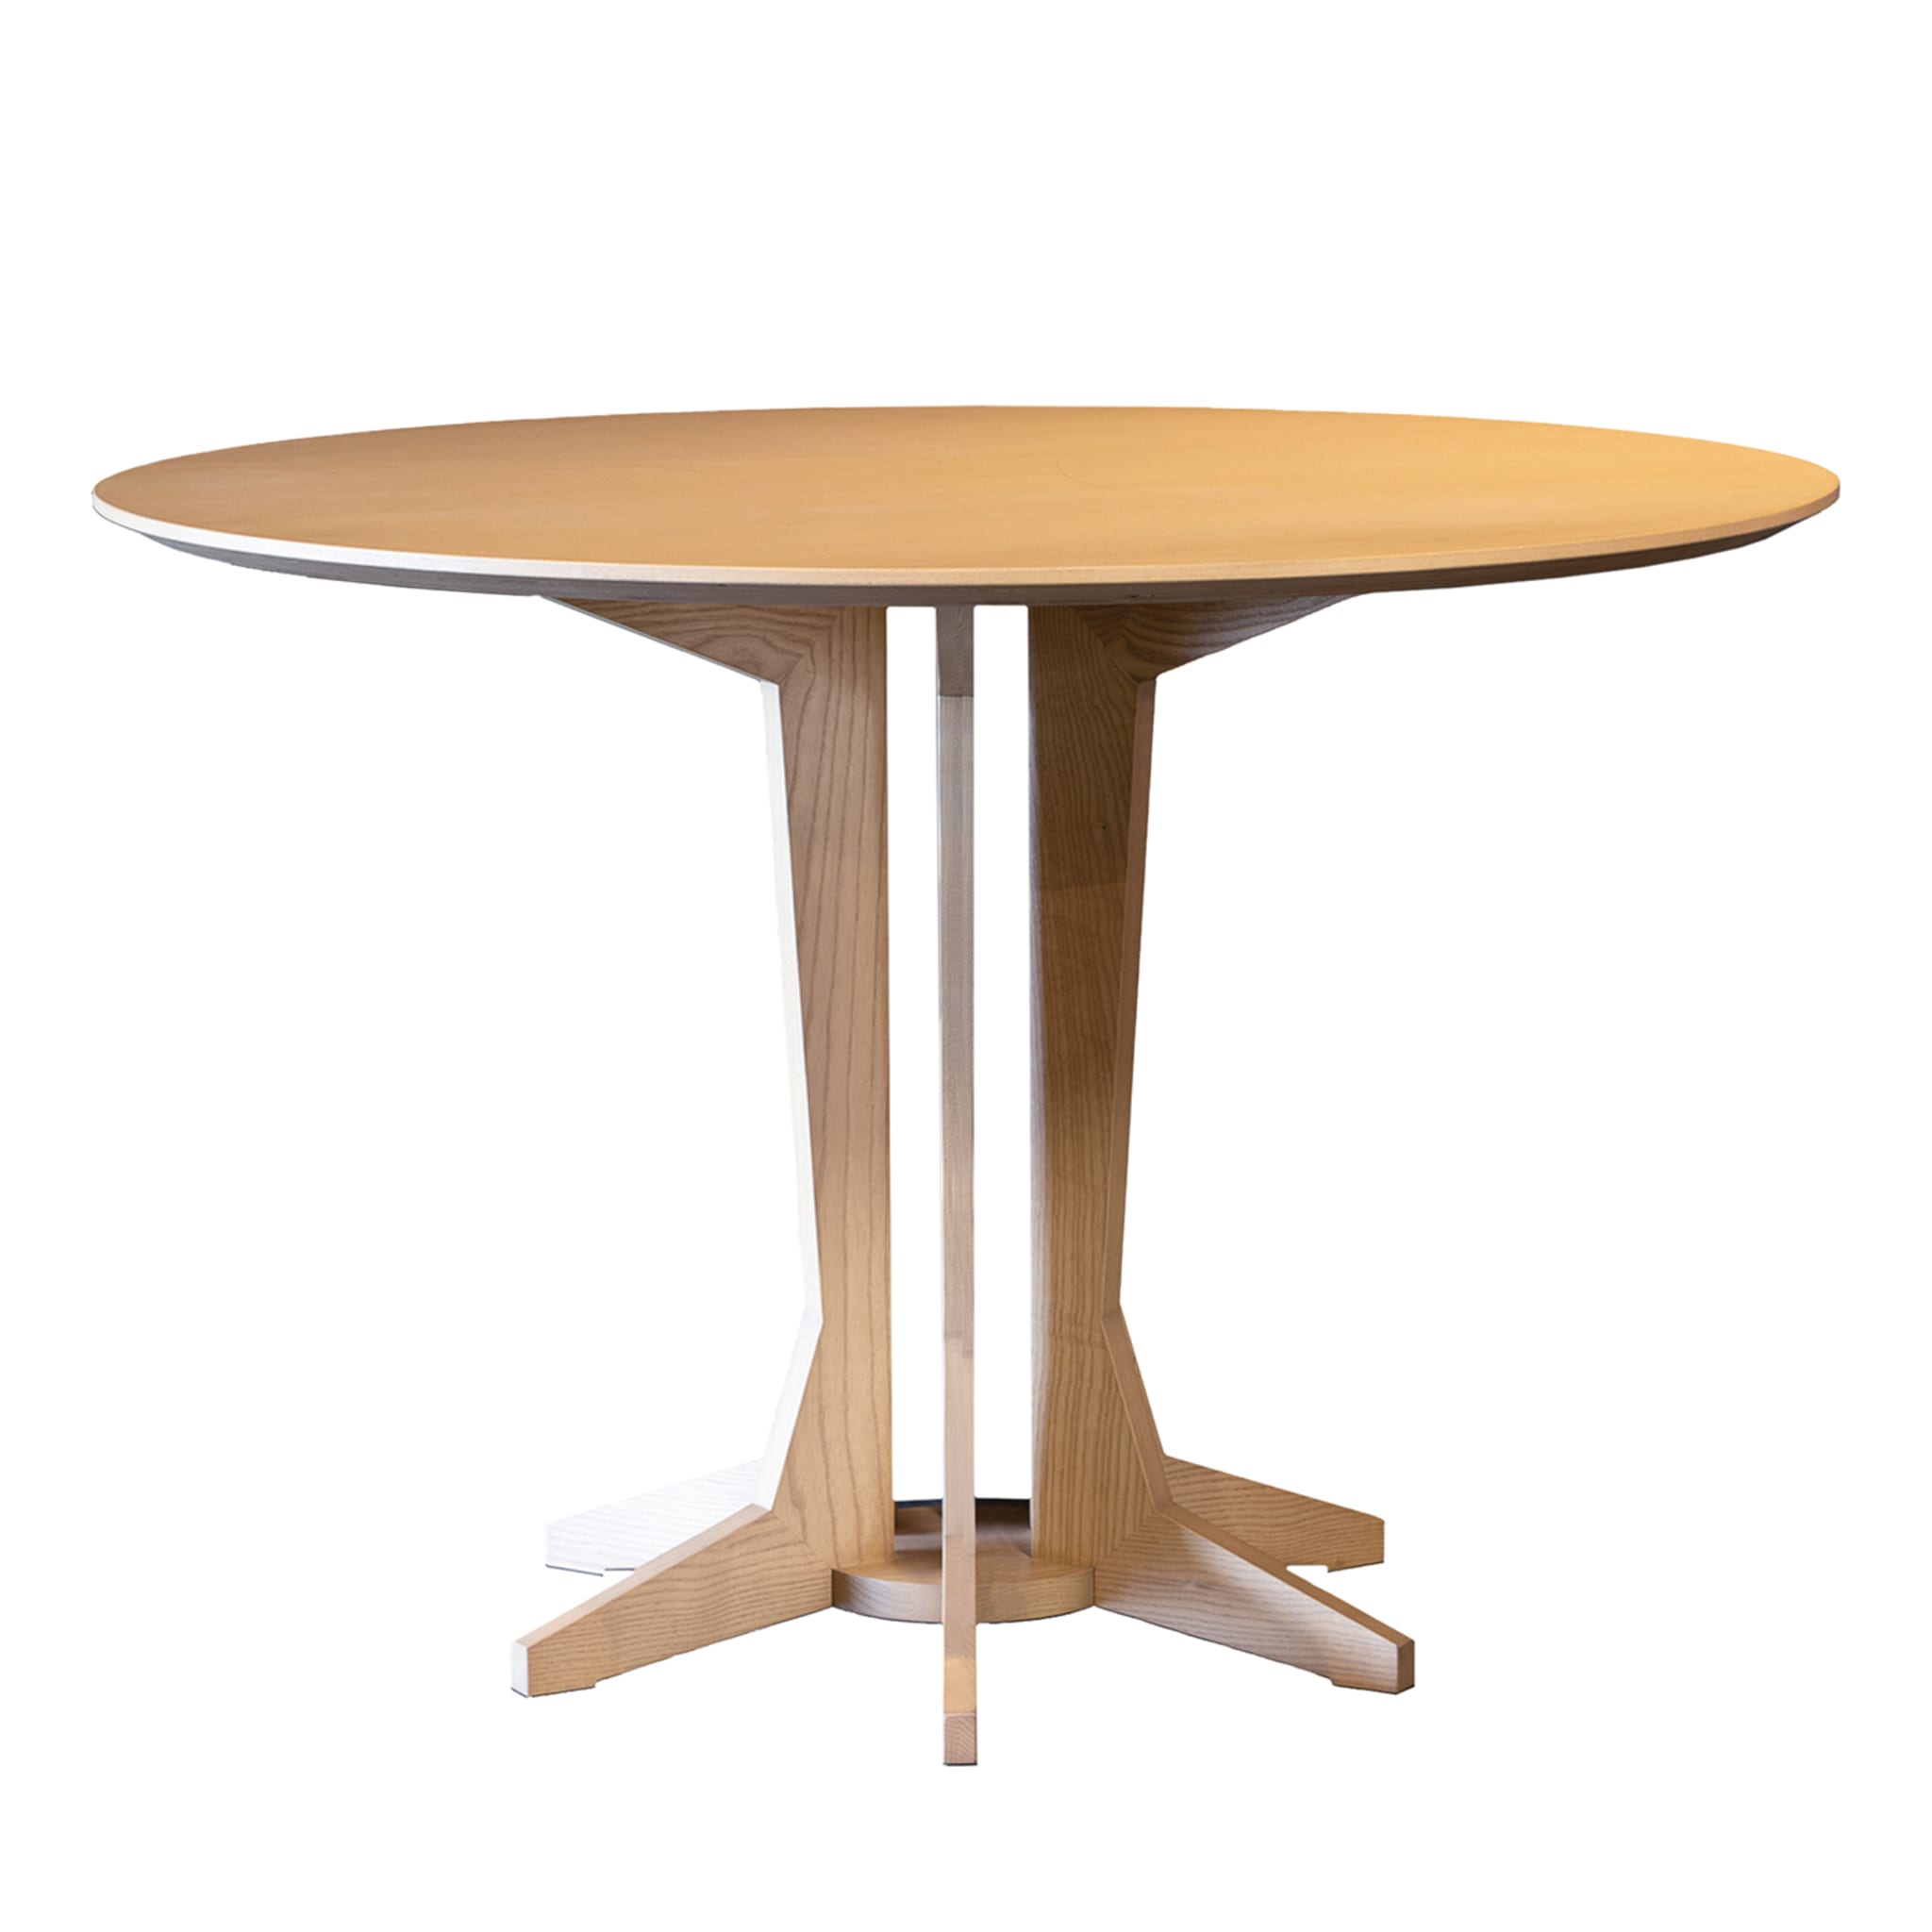 BADANO 1954 round dining table by Franco Albini - Main view